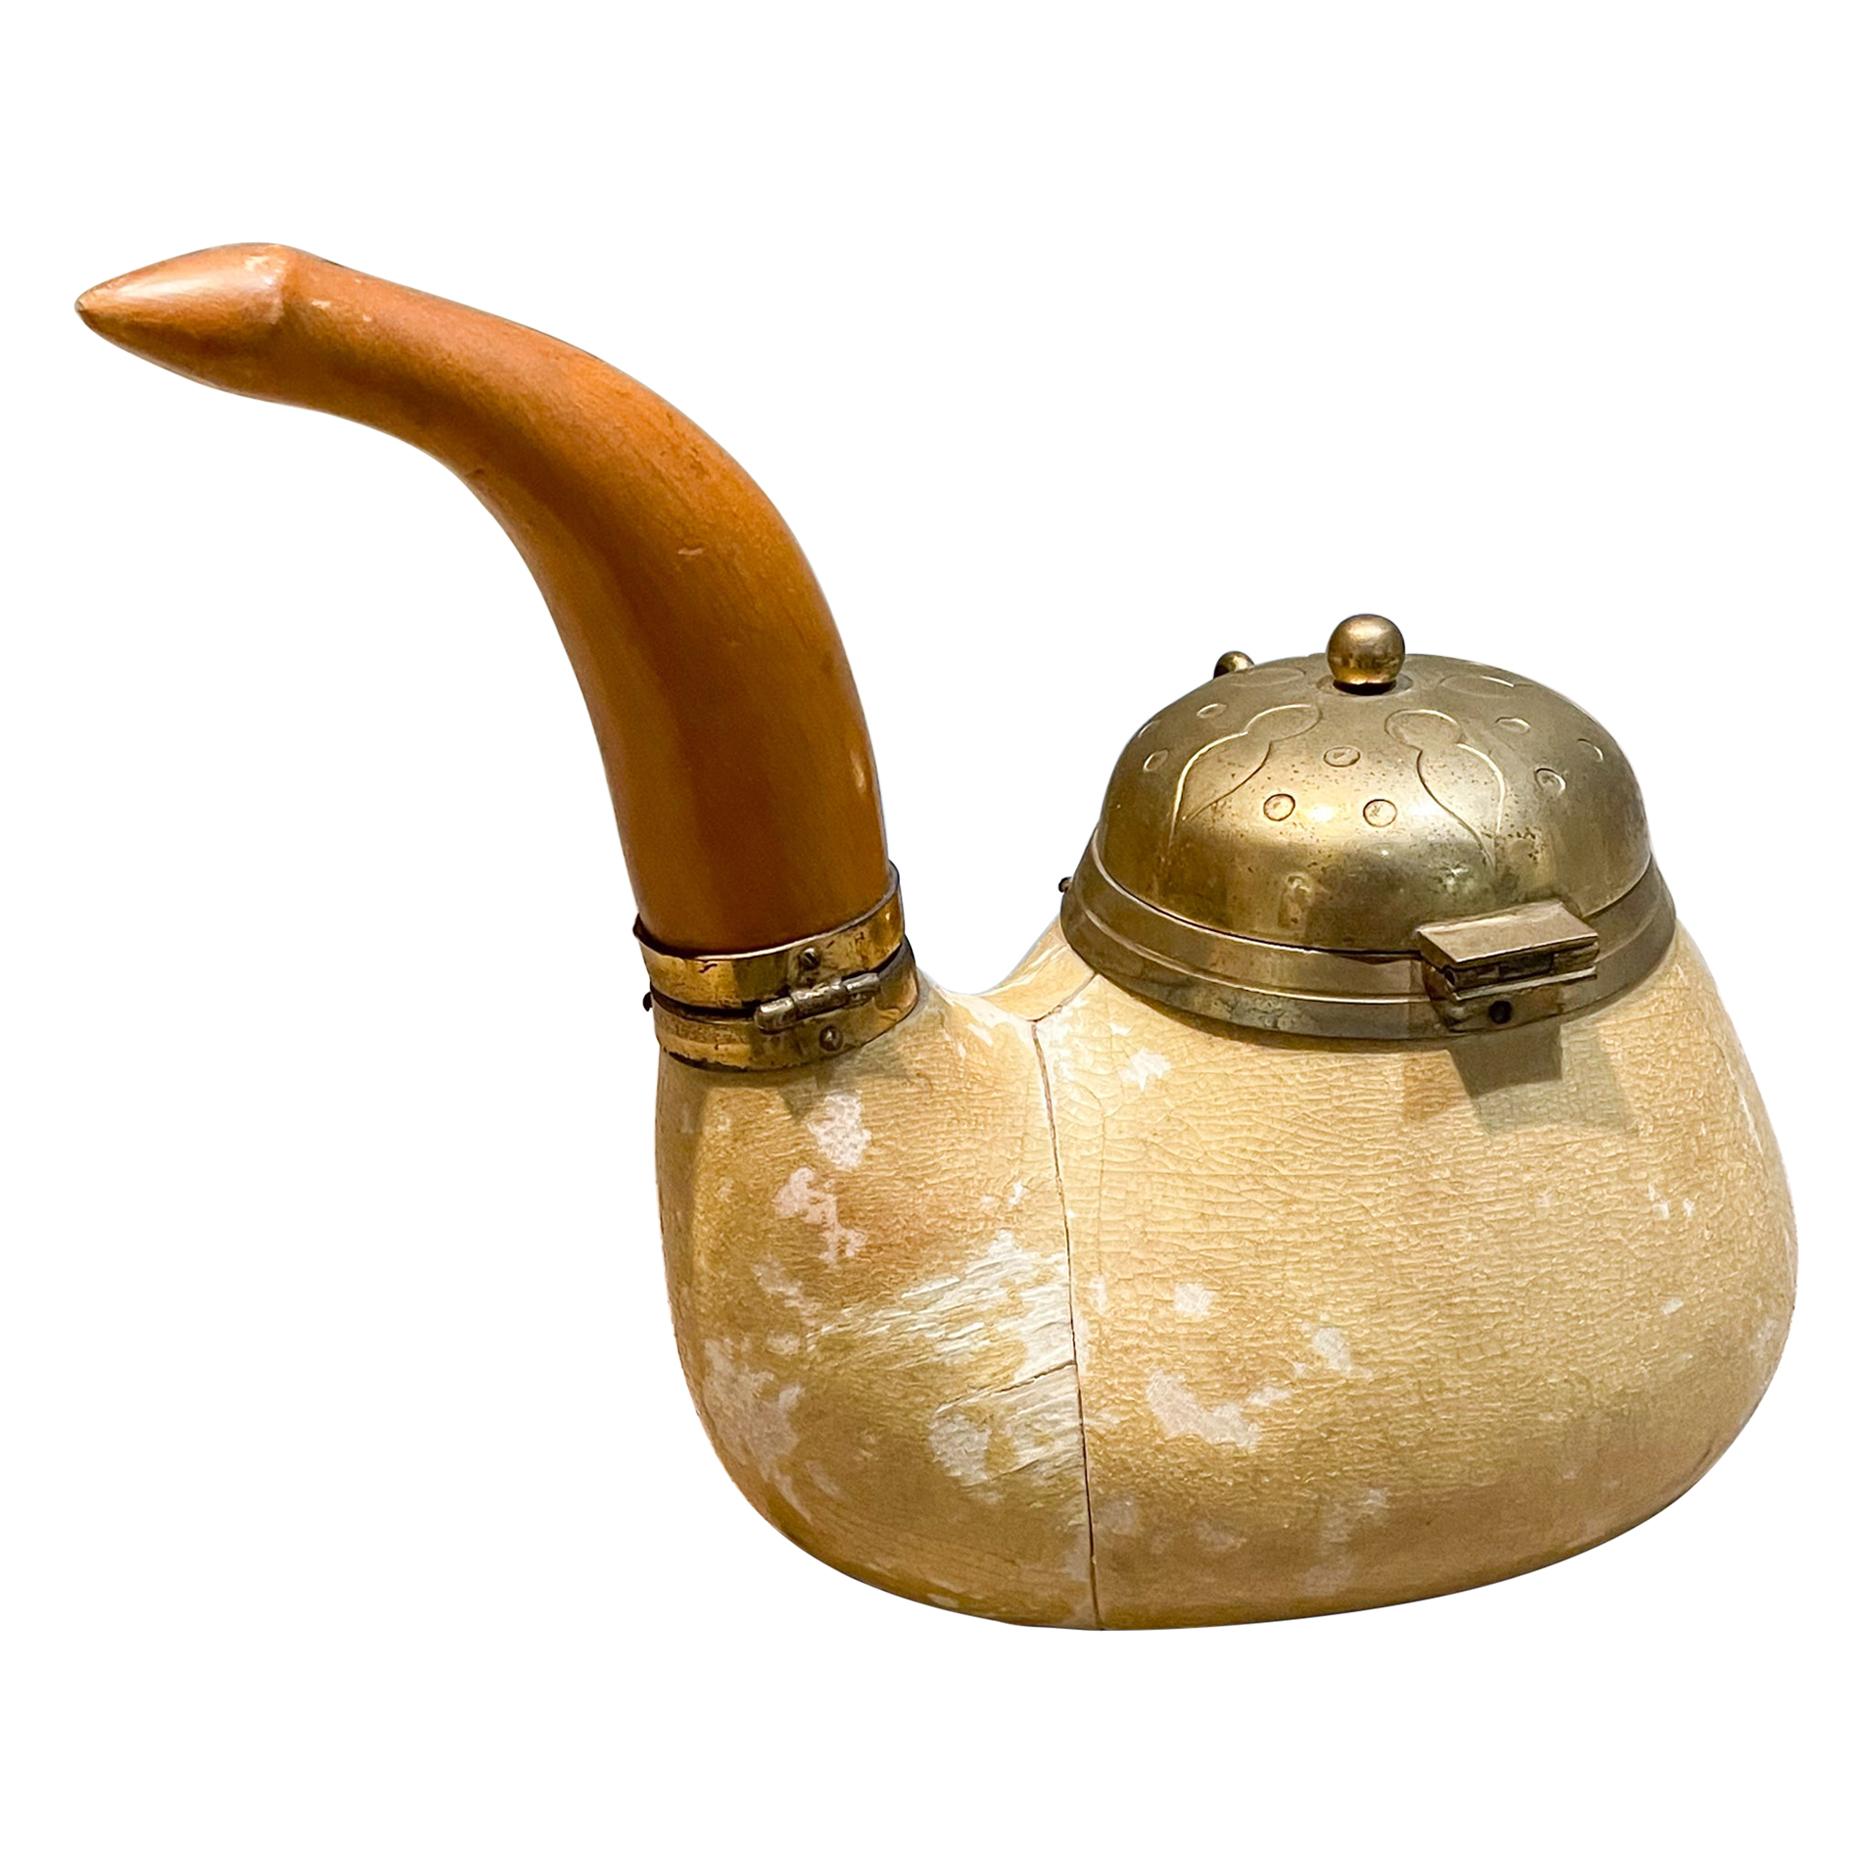 Aldo Tura Macabo Tobacco Pipe Container Lacquered Goatskin and Brass Italy 1940s